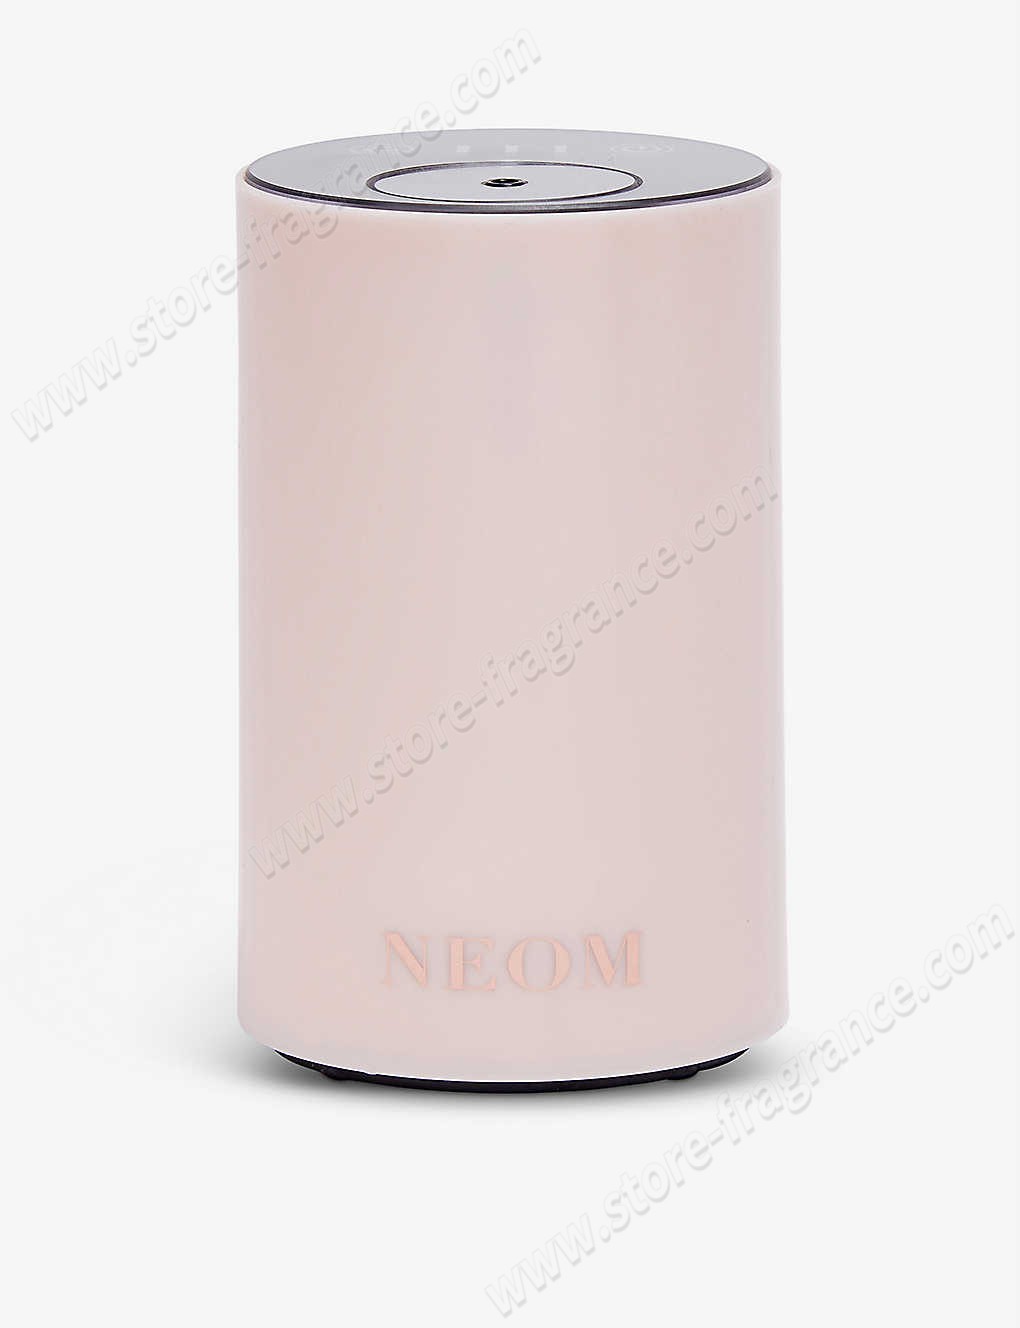 NEOM/Wellbeing Pod mini scented oil diffuser ✿ Discount Store - NEOM/Wellbeing Pod mini scented oil diffuser ✿ Discount Store